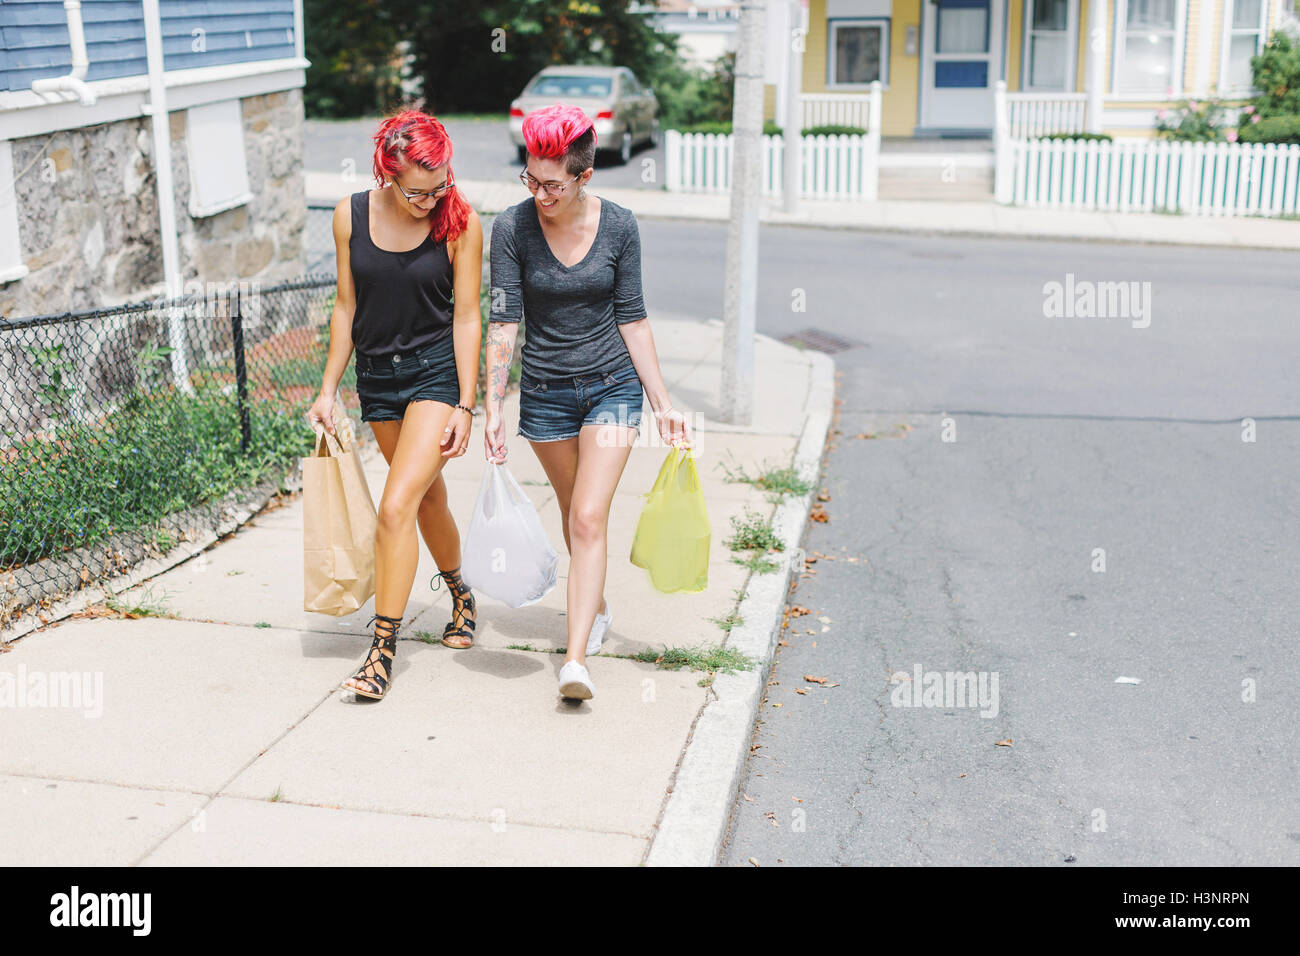 Two female friends with pink hair walking on sidewalk carrying shopping bags Stock Photo